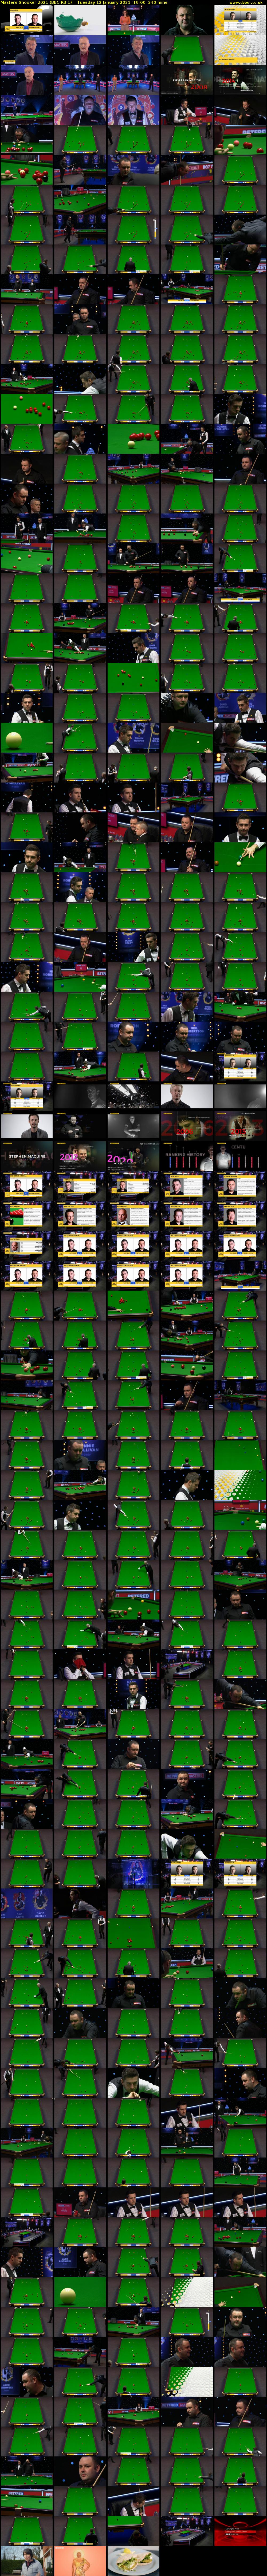 Masters Snooker 2021 (BBC RB 1) Tuesday 12 January 2021 19:00 - 23:00